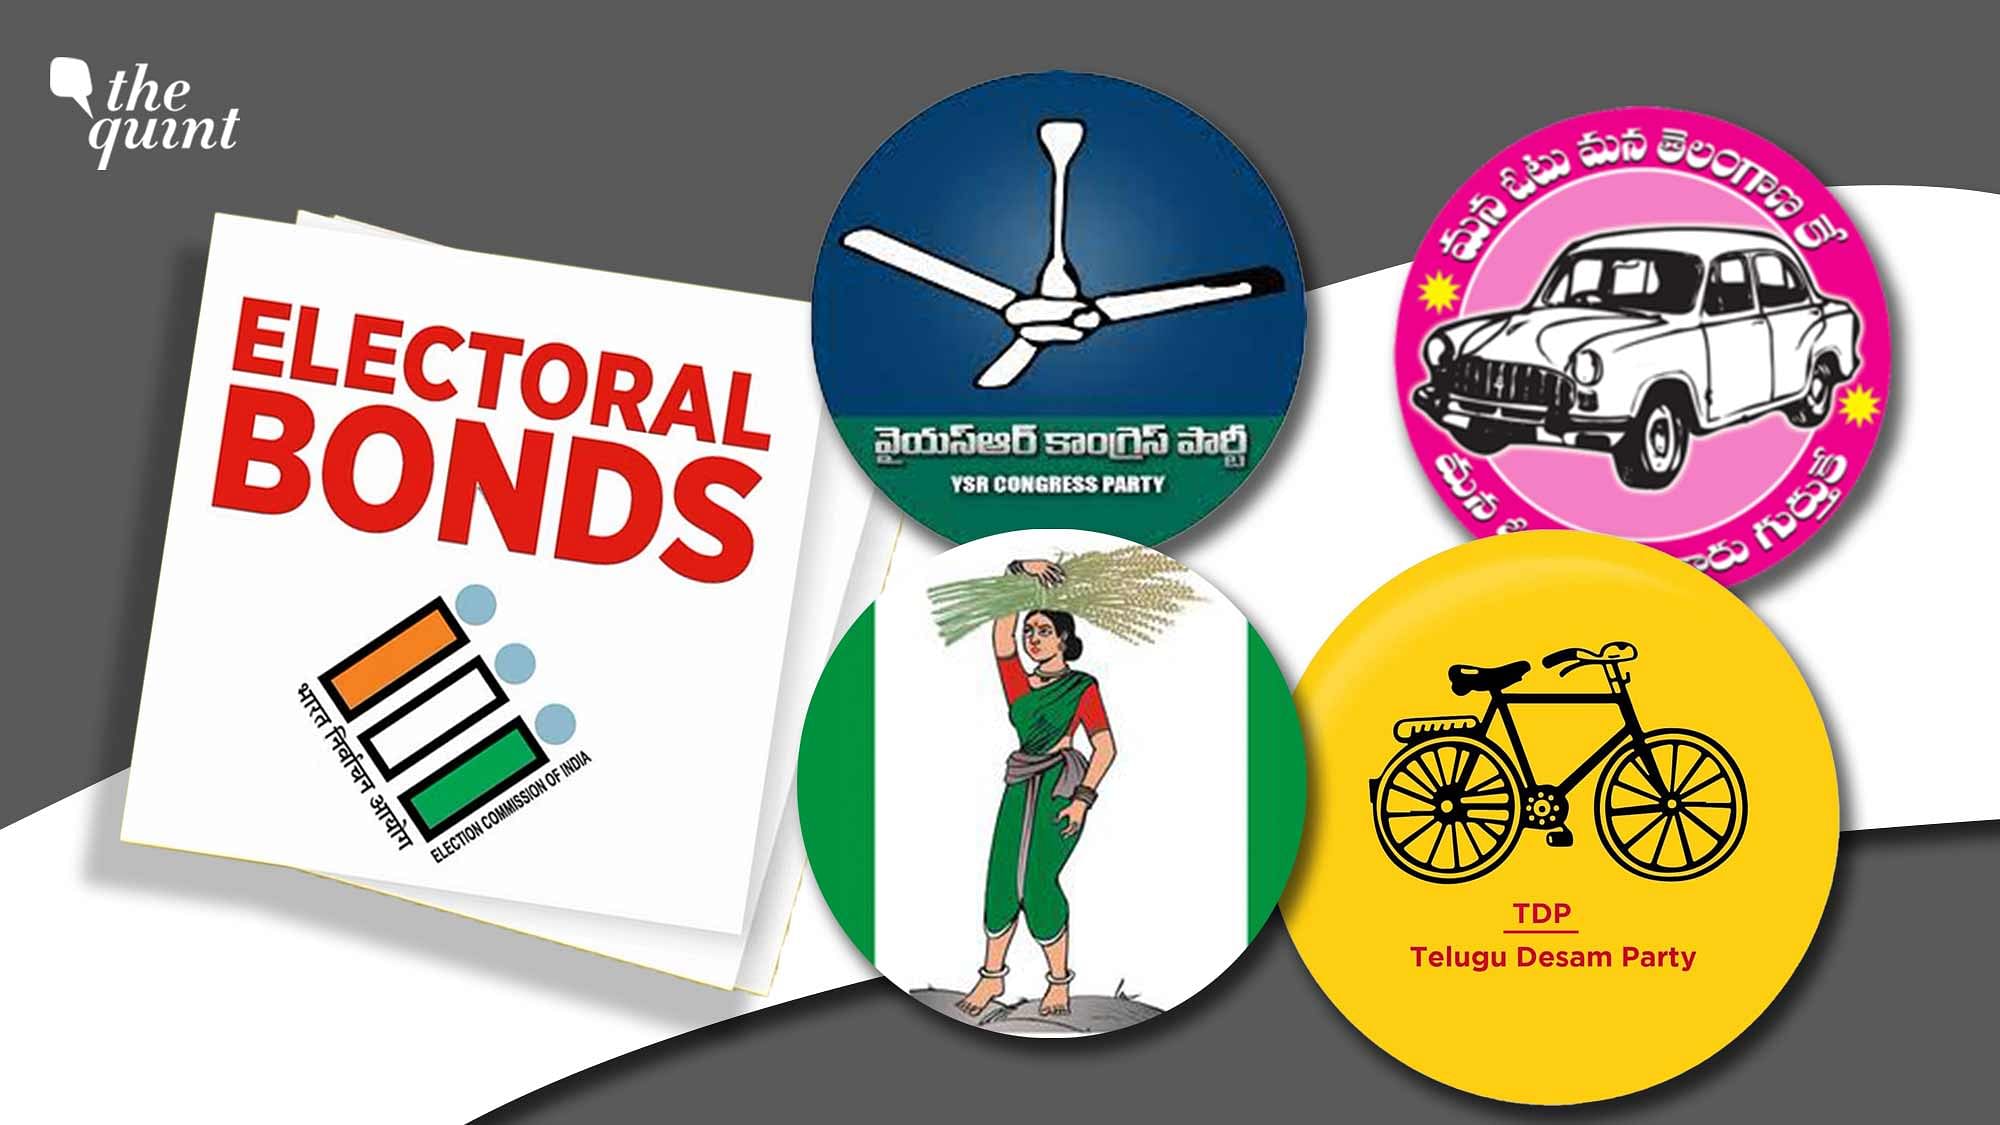 Ysr congress party - Top vector, png, psd files on Nohat.cc